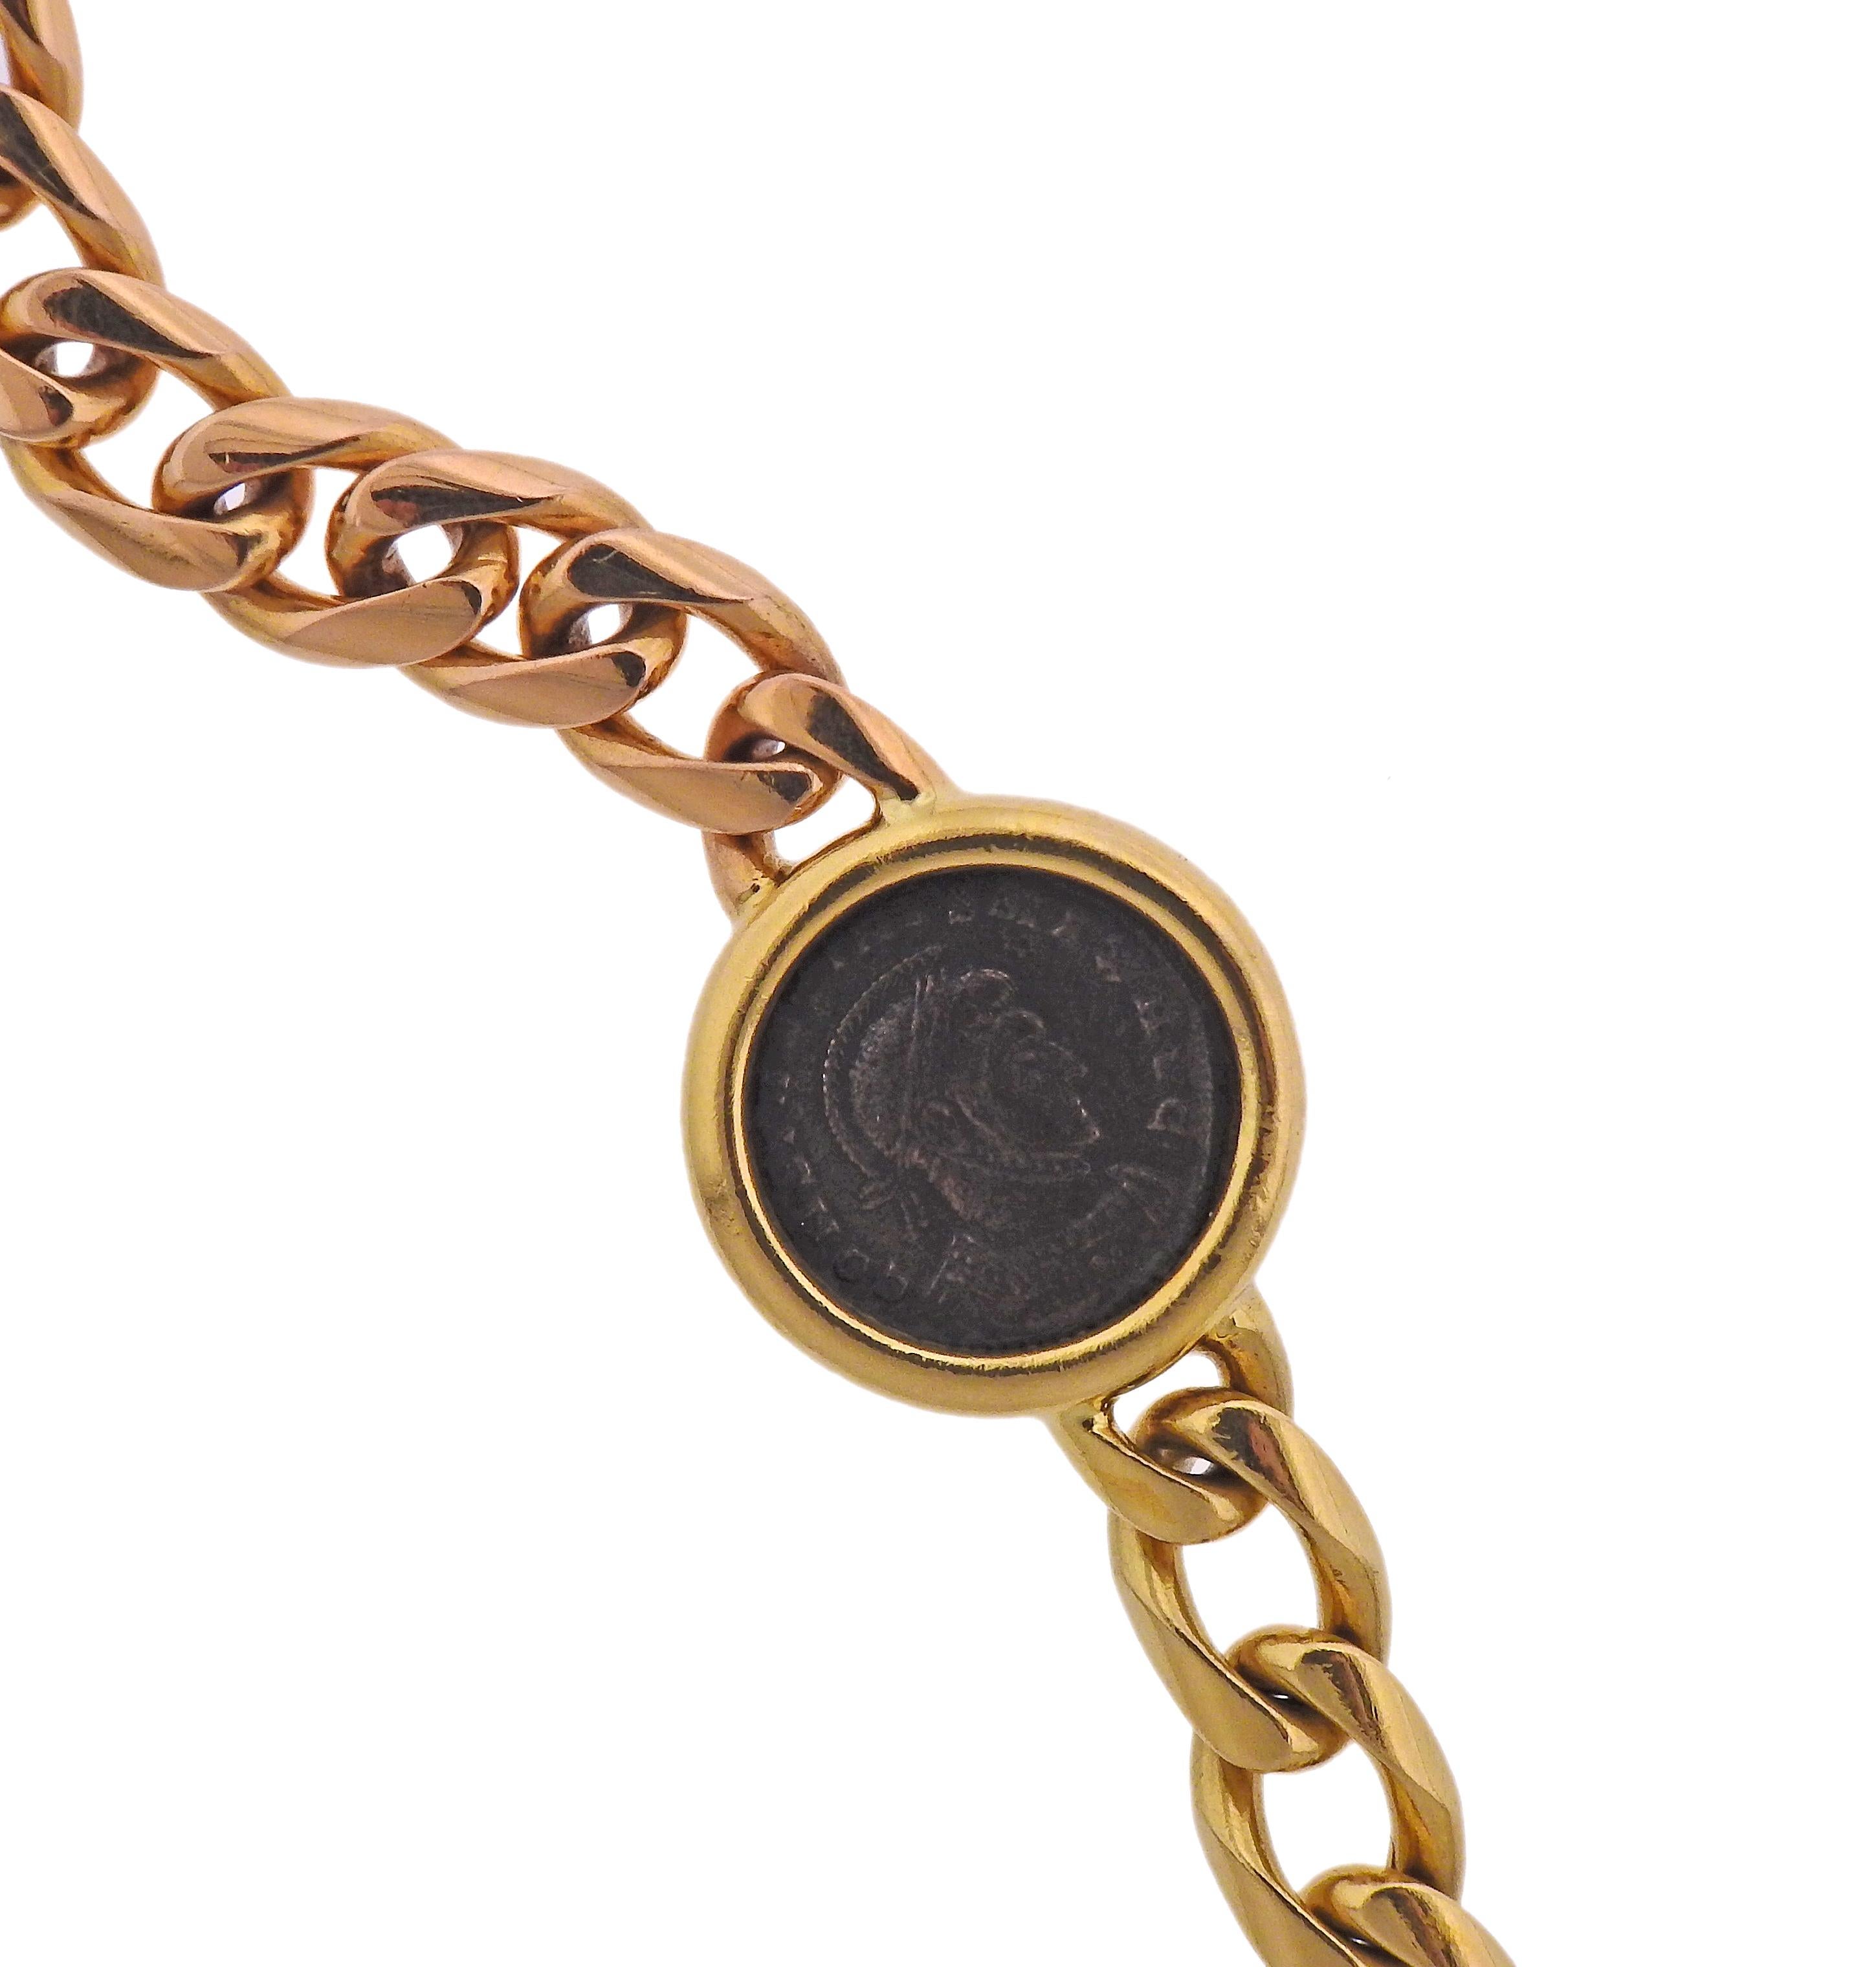 Heavy and significant Monete necklace by Bvlgari, with 6 Roman Empire Constantinus ancient coins. Featuring 18k gold curb link necklace, alternating white, yellow and rose gold. Length - 30.5